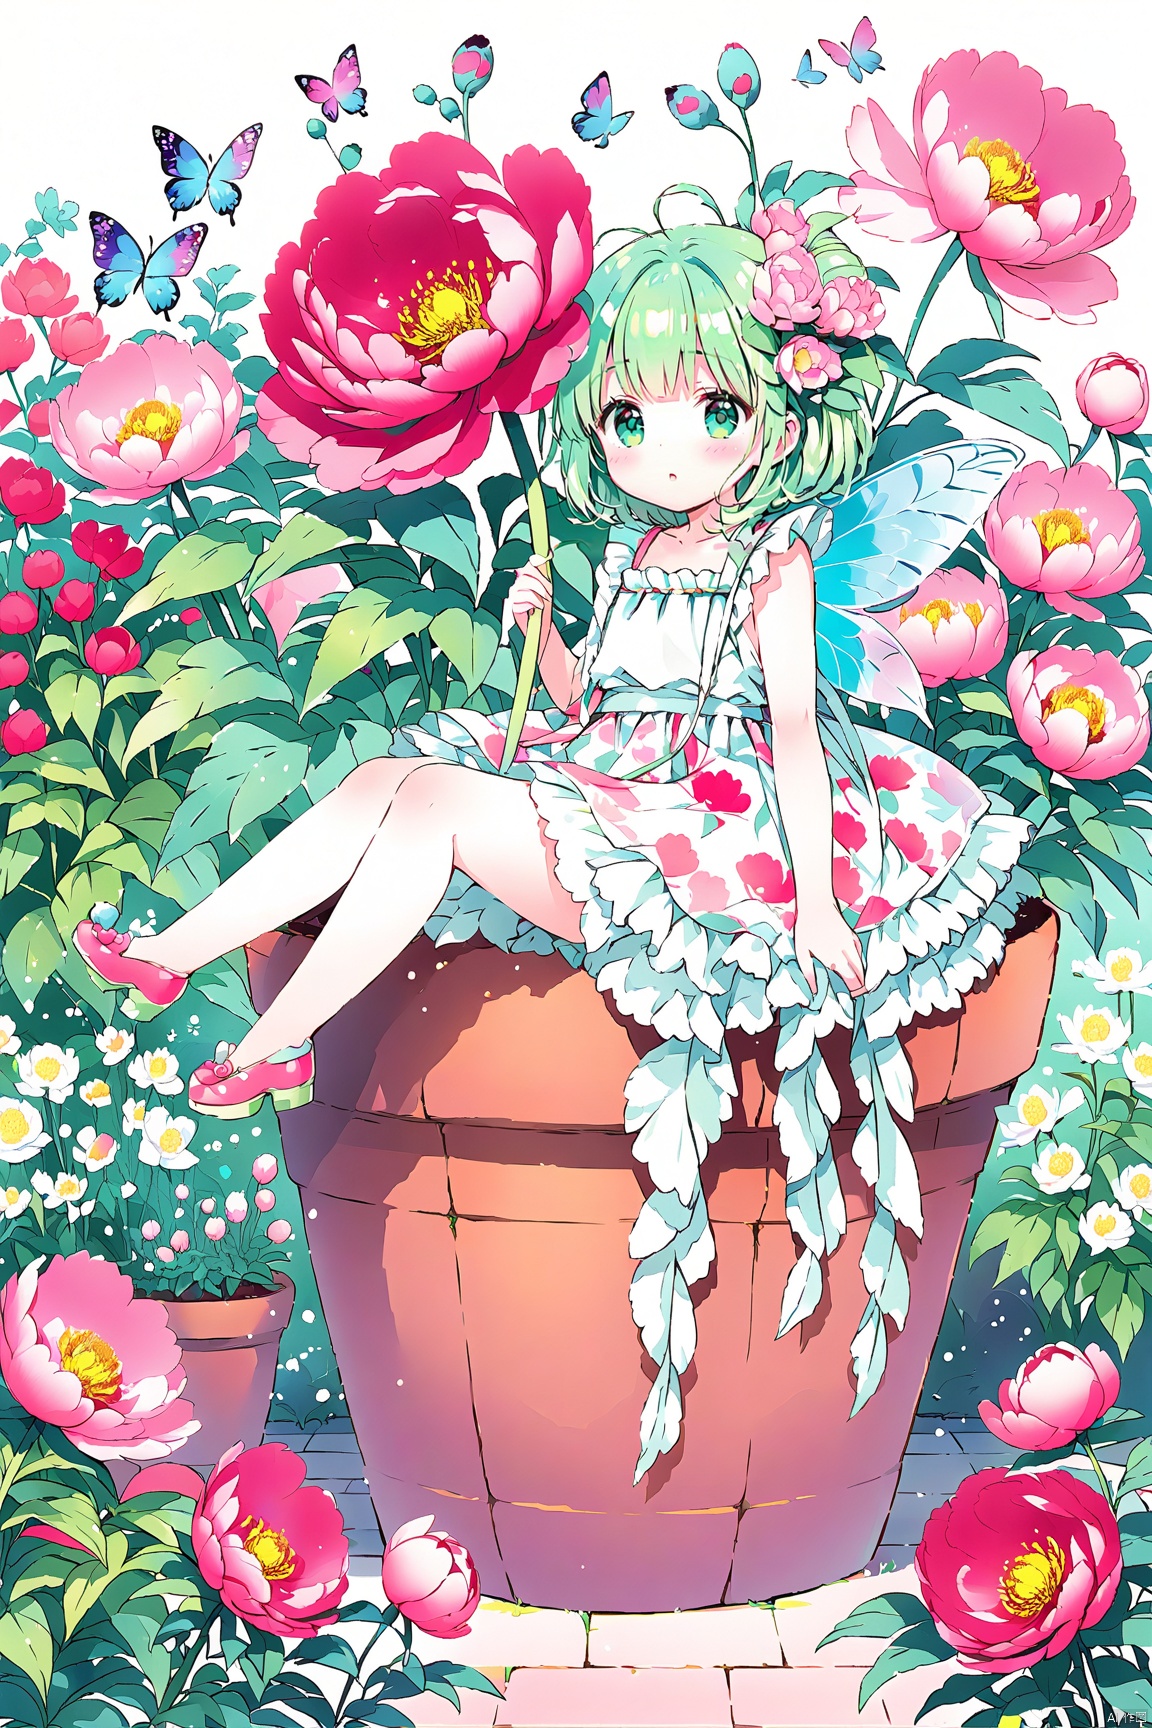  a minigirl sitting on the edge of a plant pot with an oversized flower,butterfly on it,garden,peony,pixie, loli, paleColor,